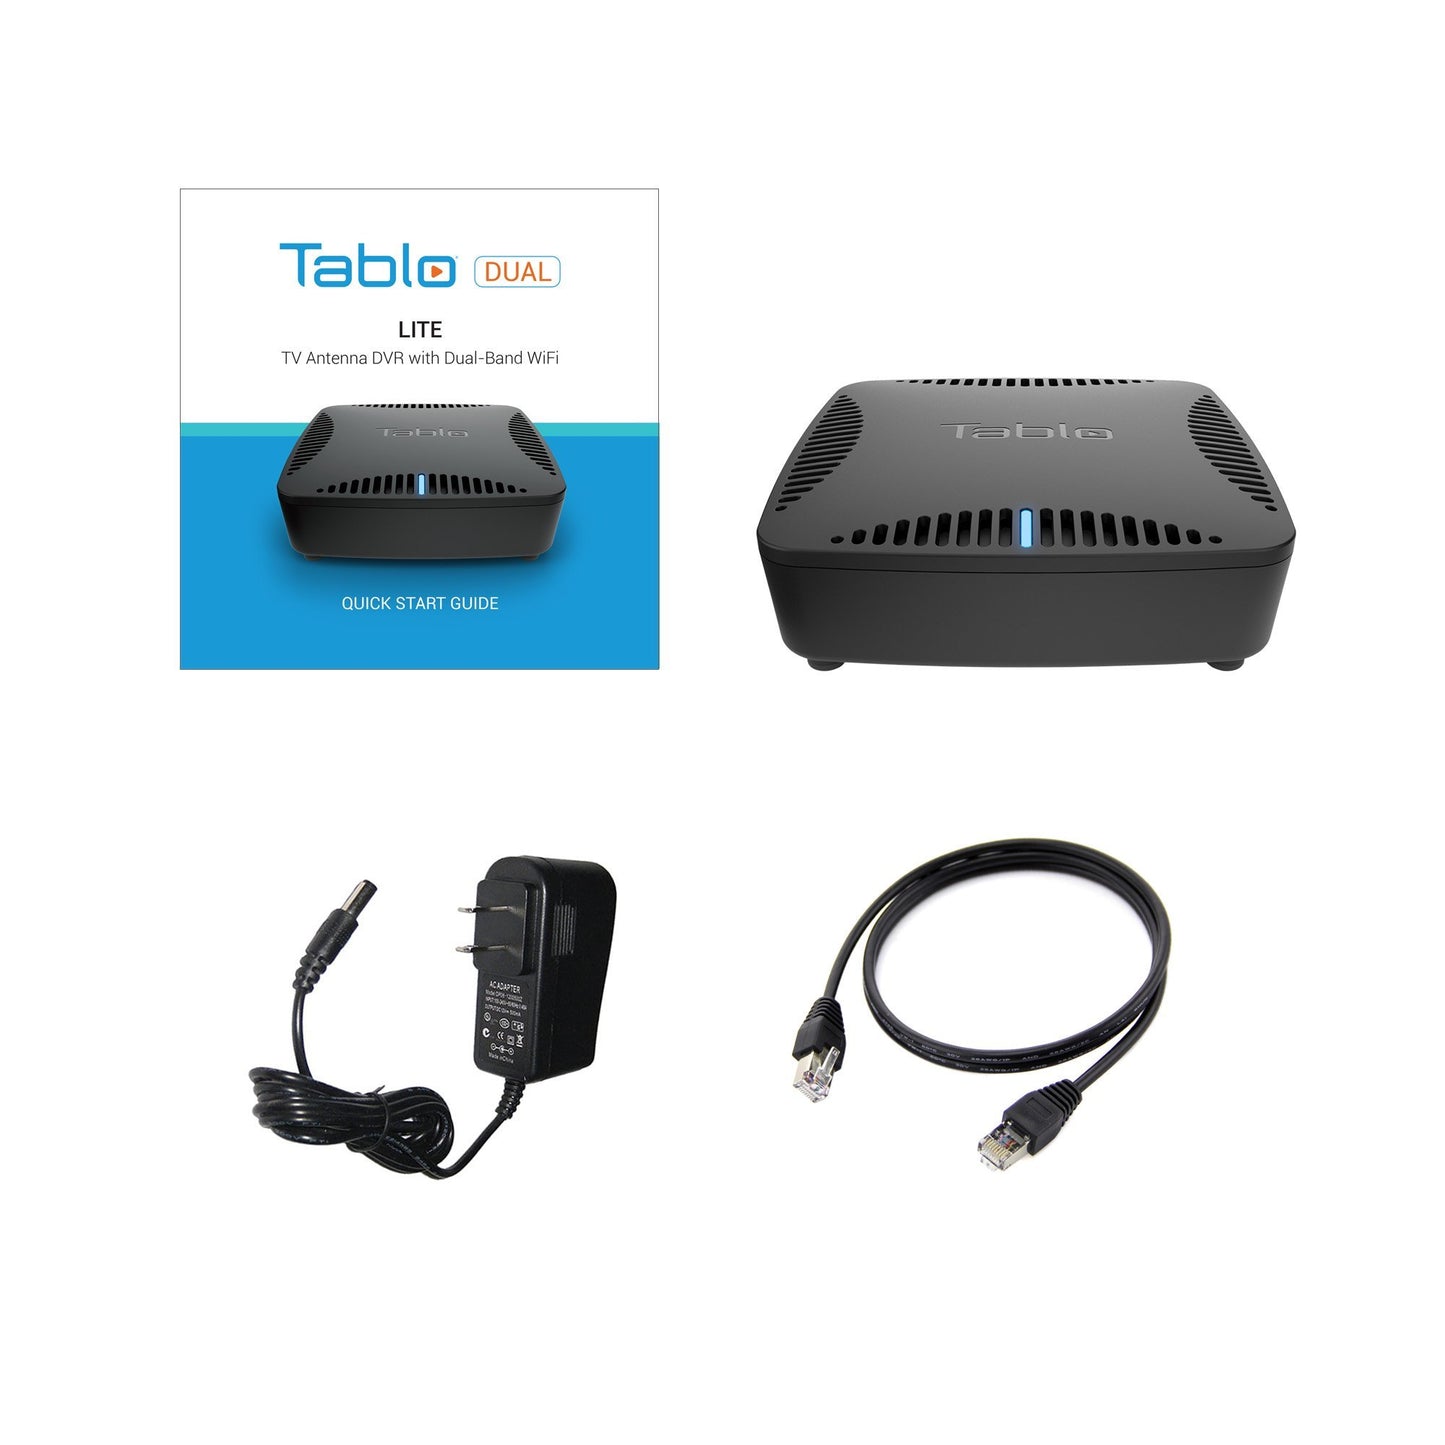 Tablo DUAL LITE Over-The-Air (OTA) DVR (Digital Video Recorder) for Cord Cutters. What's in the box: Quick Start Guide, DVR hardware, power adapter, ethernet cable.